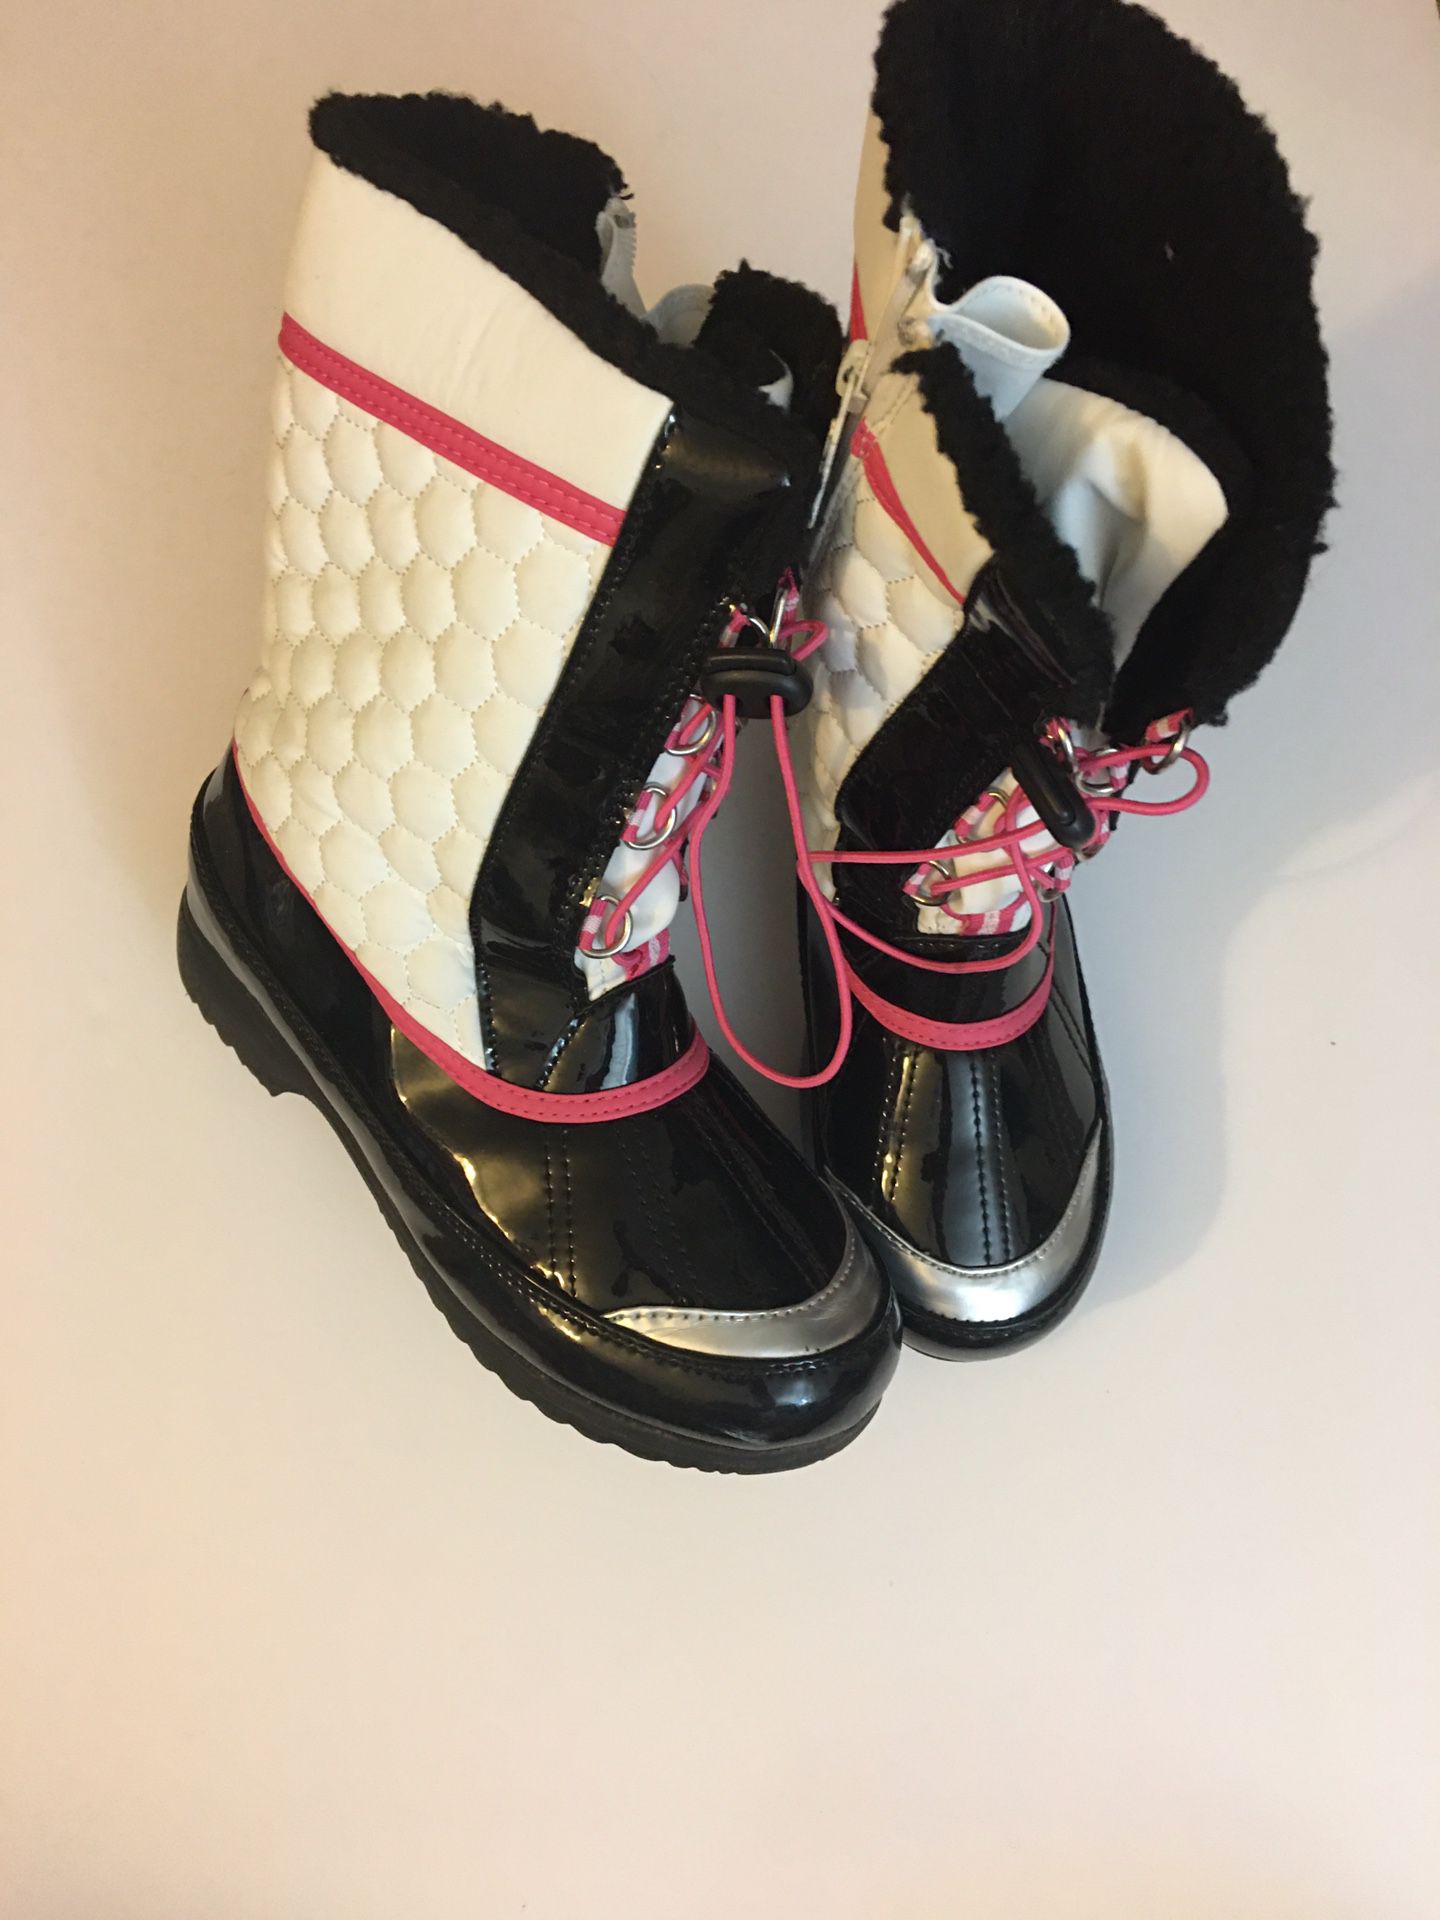 Snow boot for girls